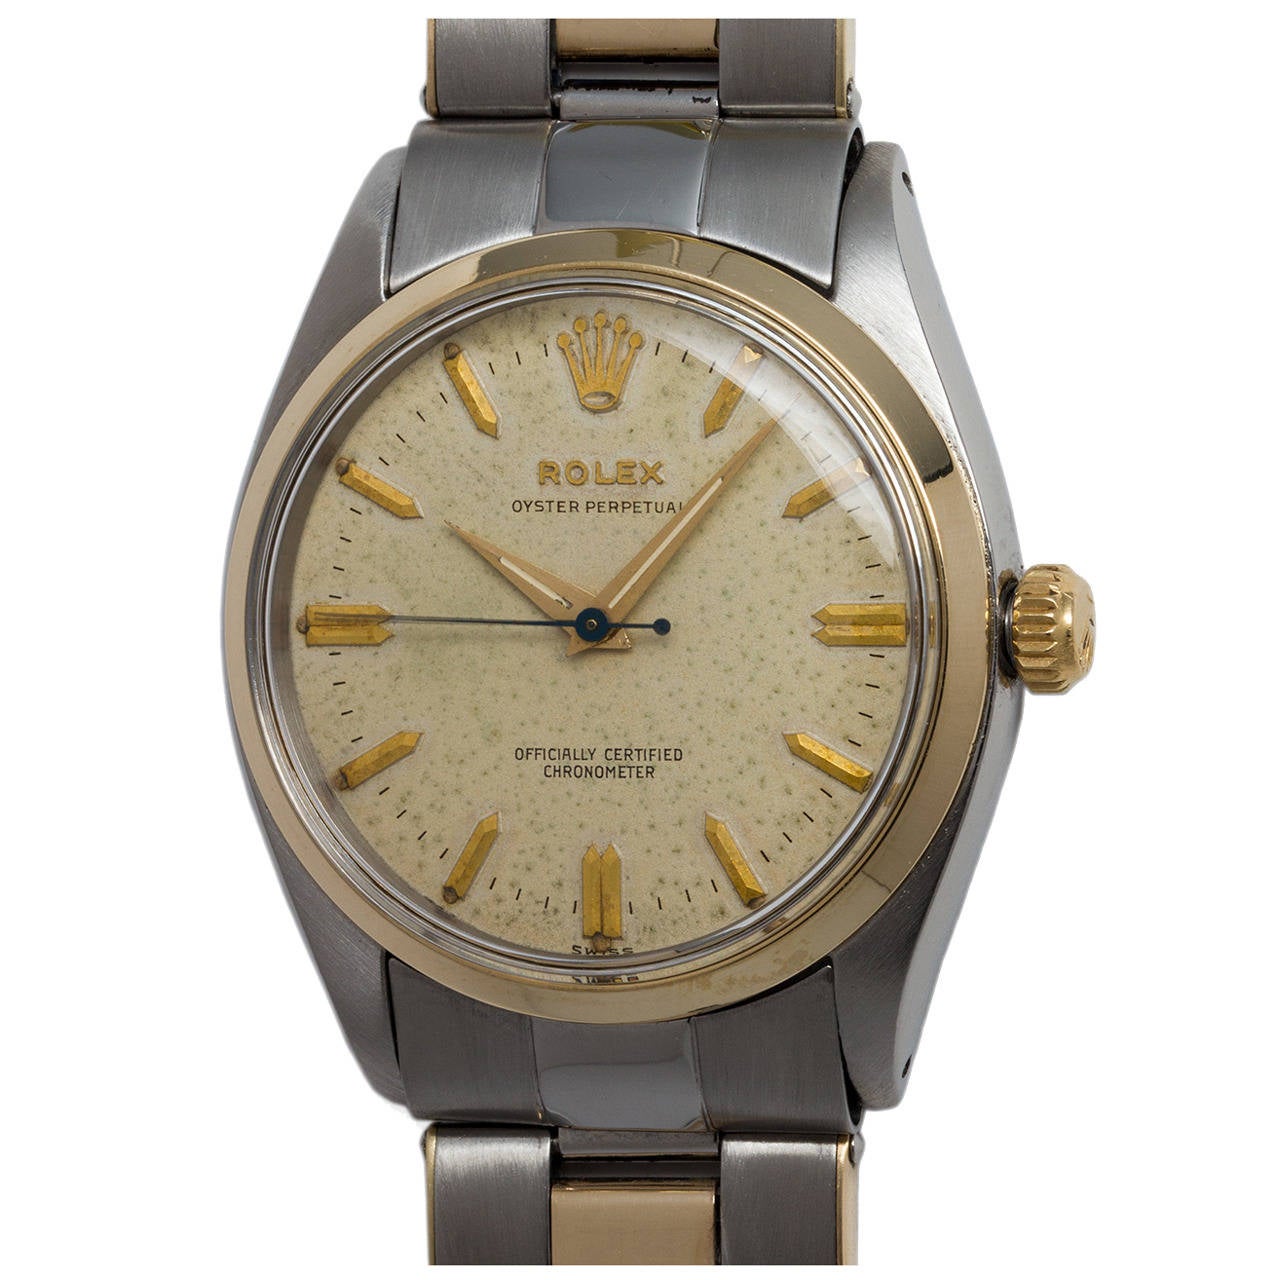 Rolex Stainless Steel and Yellow Gold Oyster Perpetual Wristwatch Ref 6564